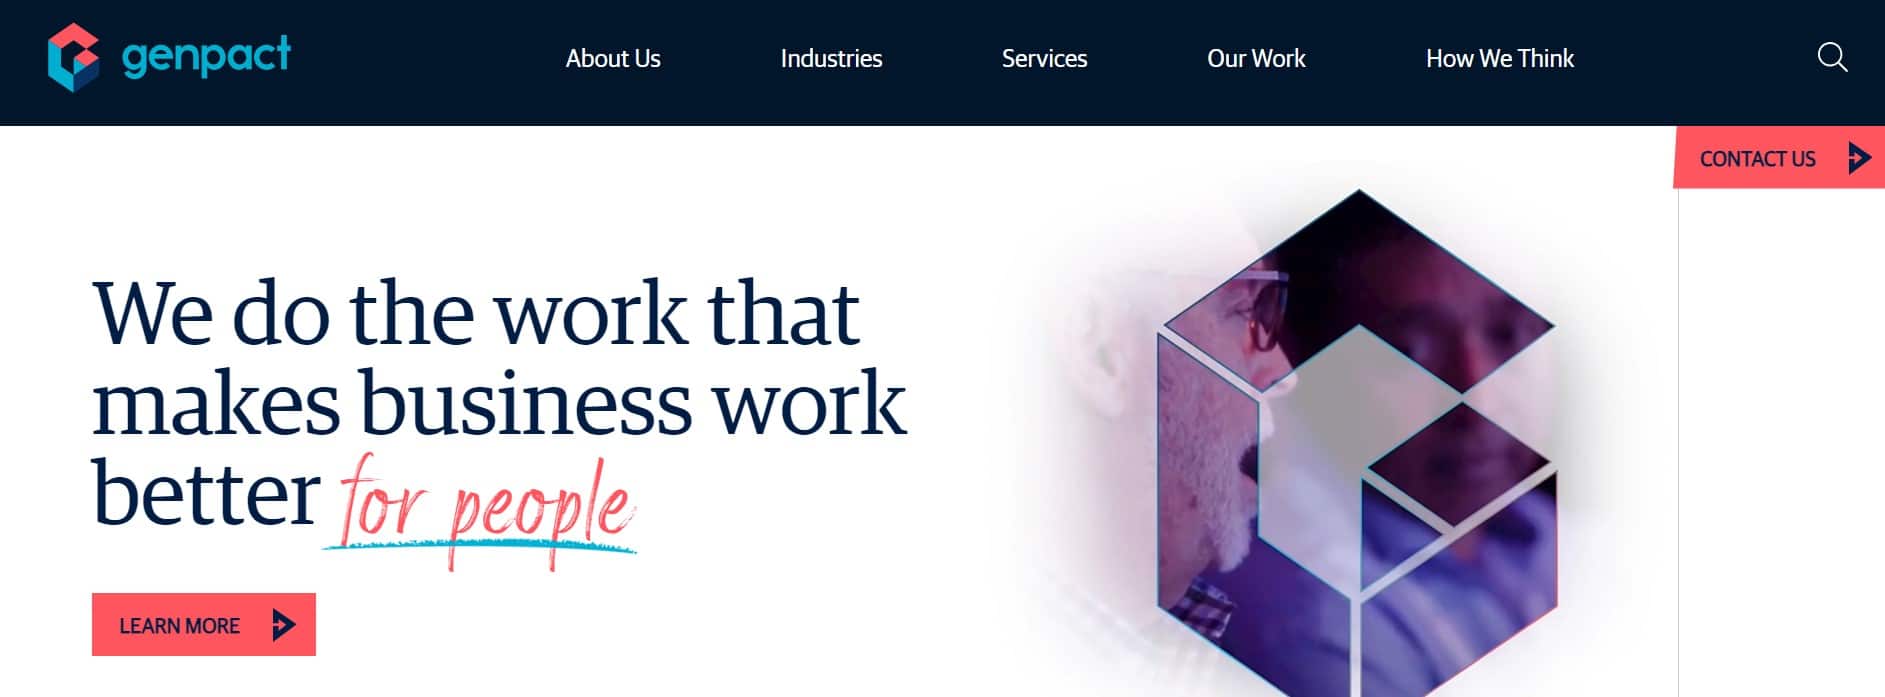 Genpact's website home page image; written we do the work that makes business work better for people in it. 